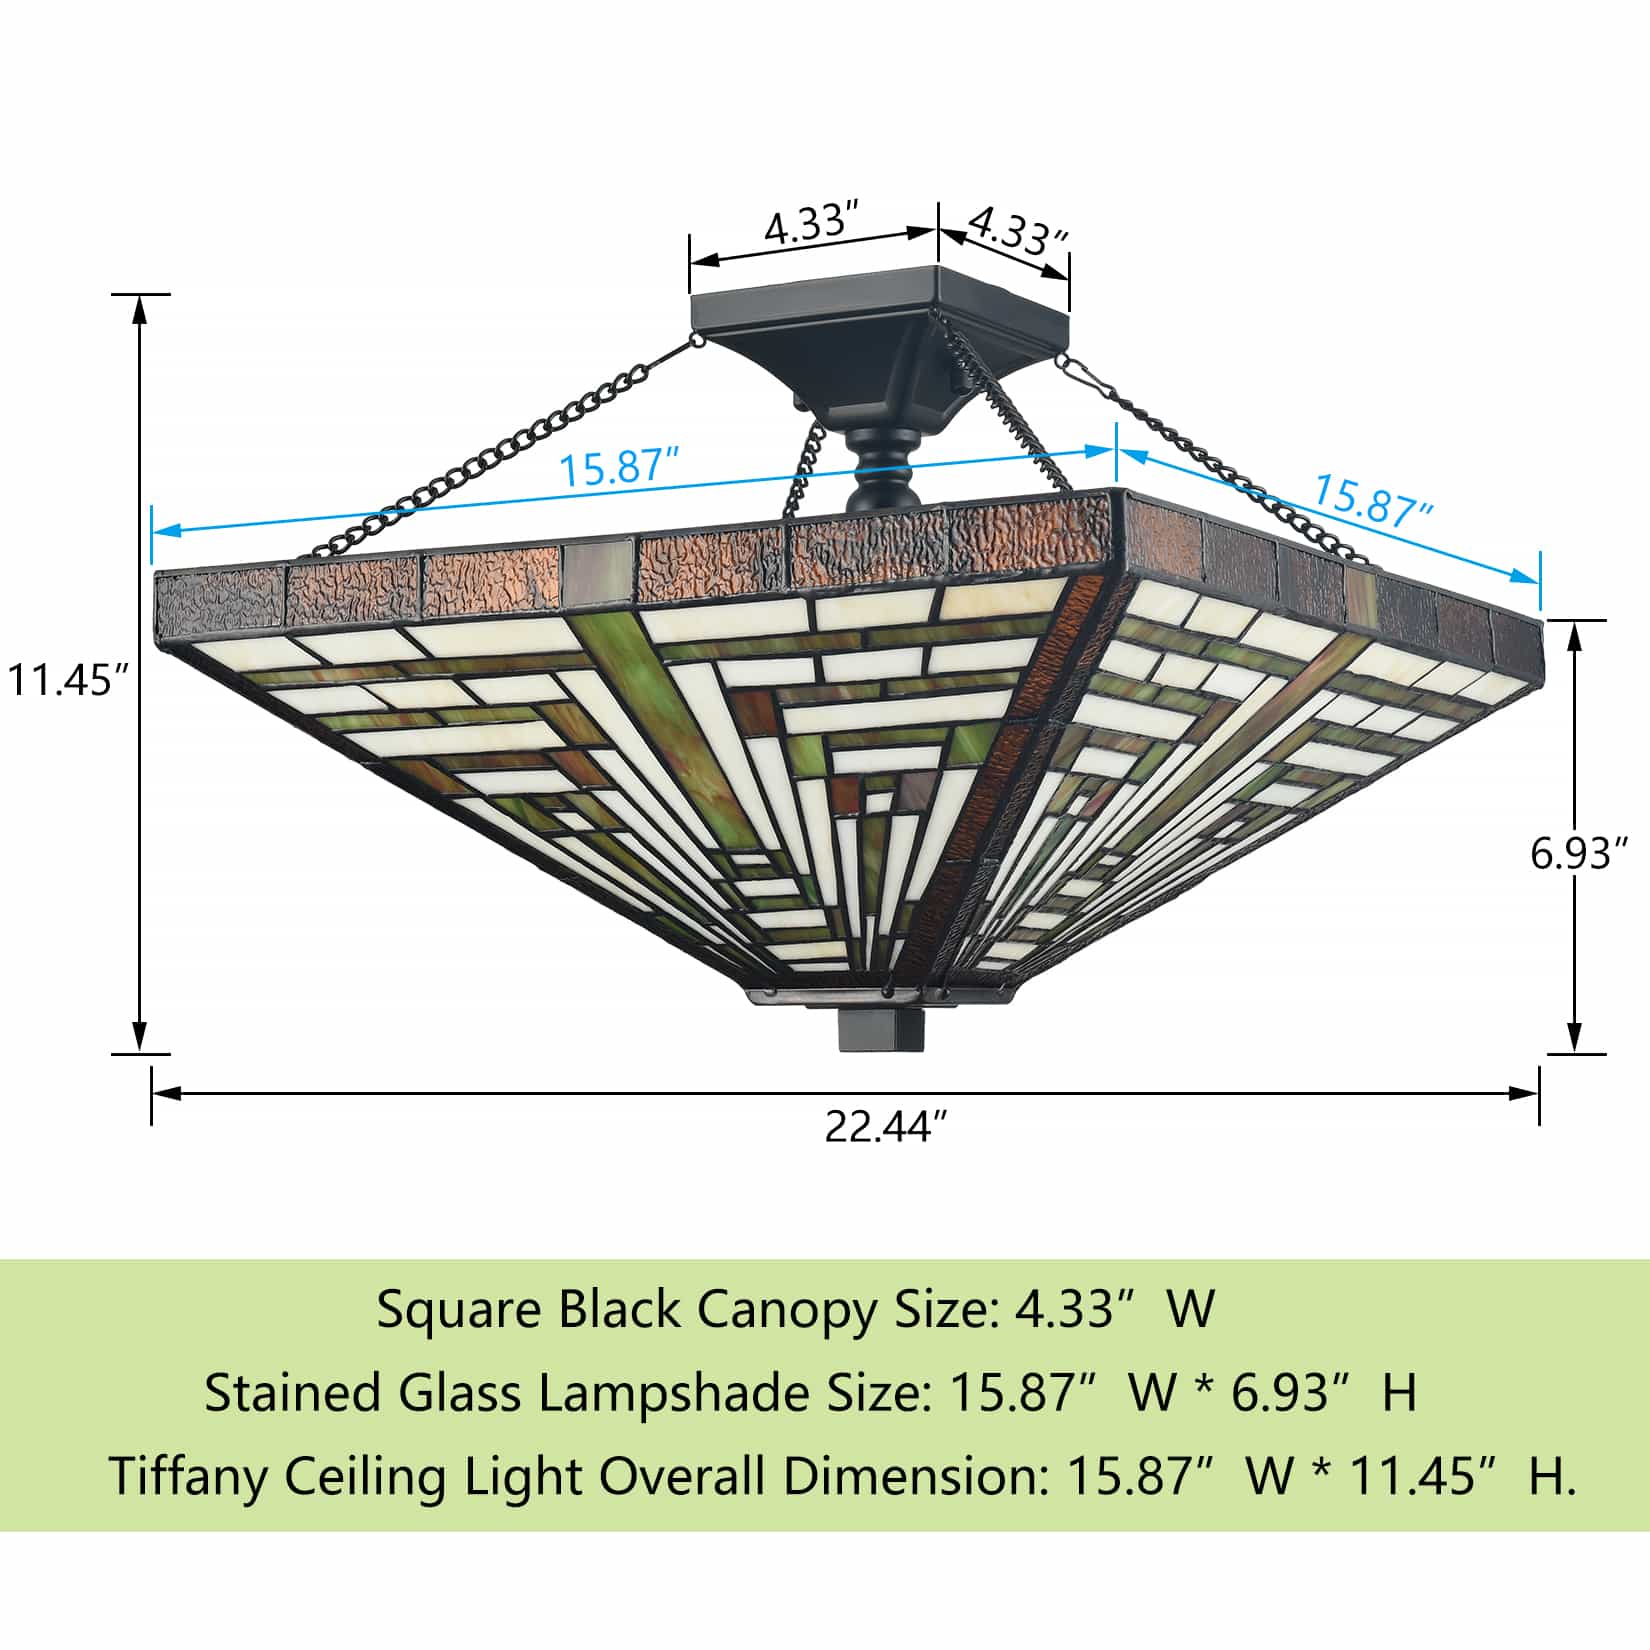 Tiffany Semi Flush Mount Light with Stained Glass Ceiling Light Fixture